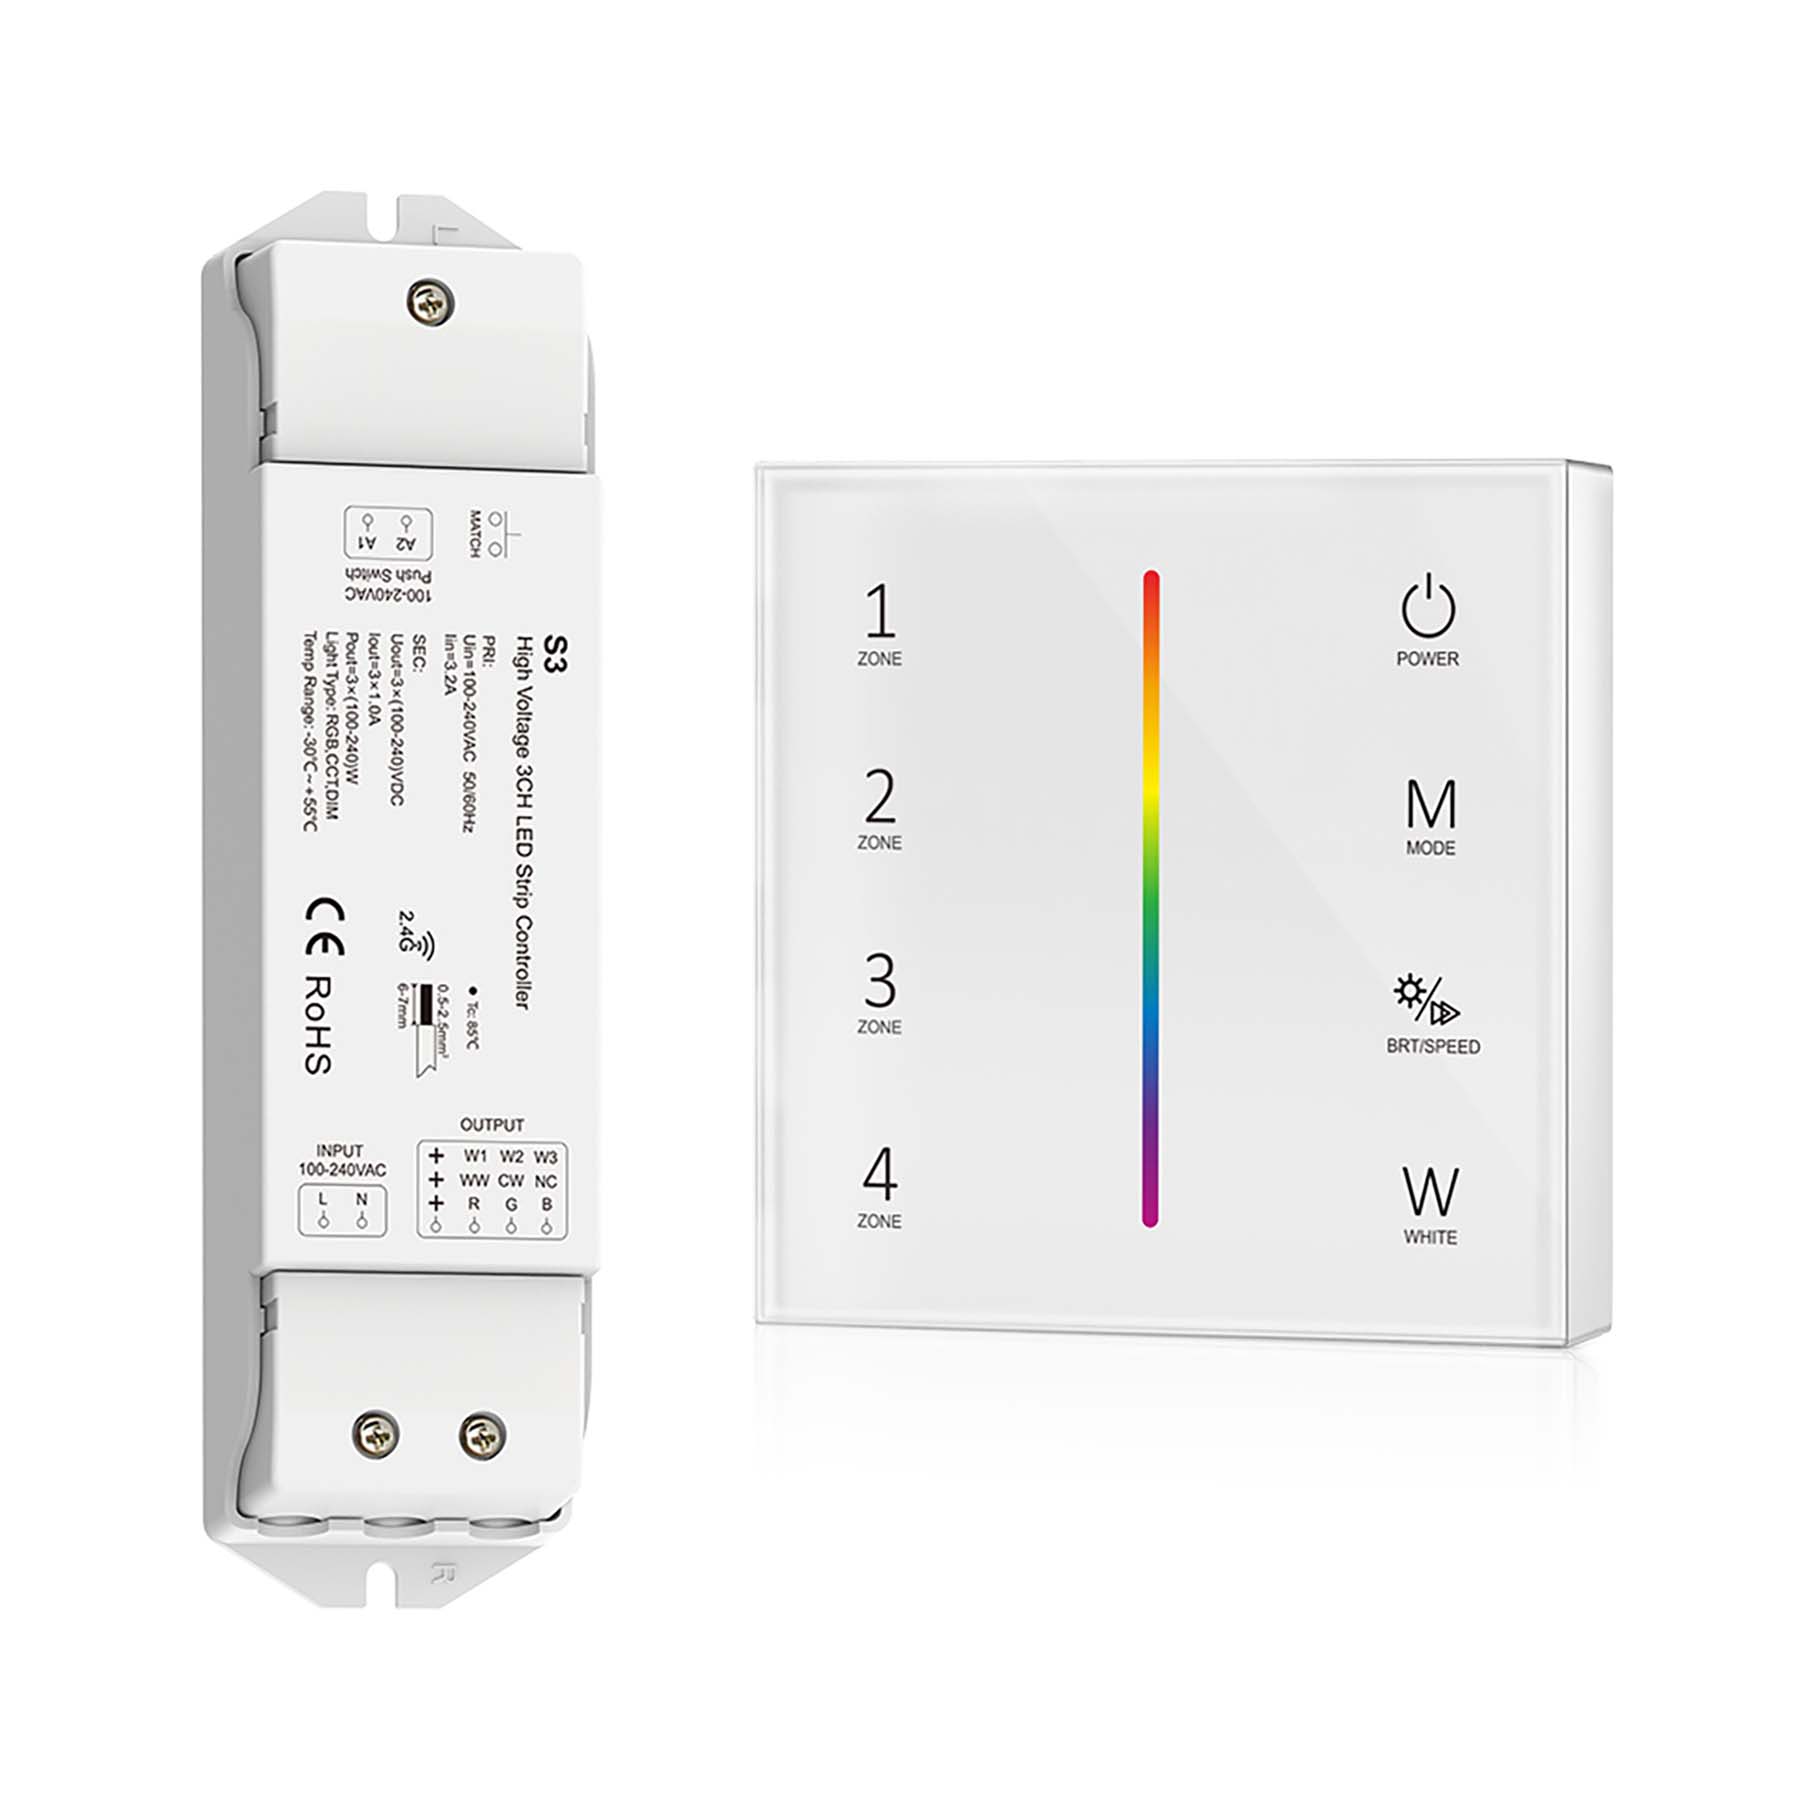 G.W.S. LED White LED 100-240V AC RGB/RGBW Controller S3 + 4 Zone Panel Remote Control 2*AAA Battery T24